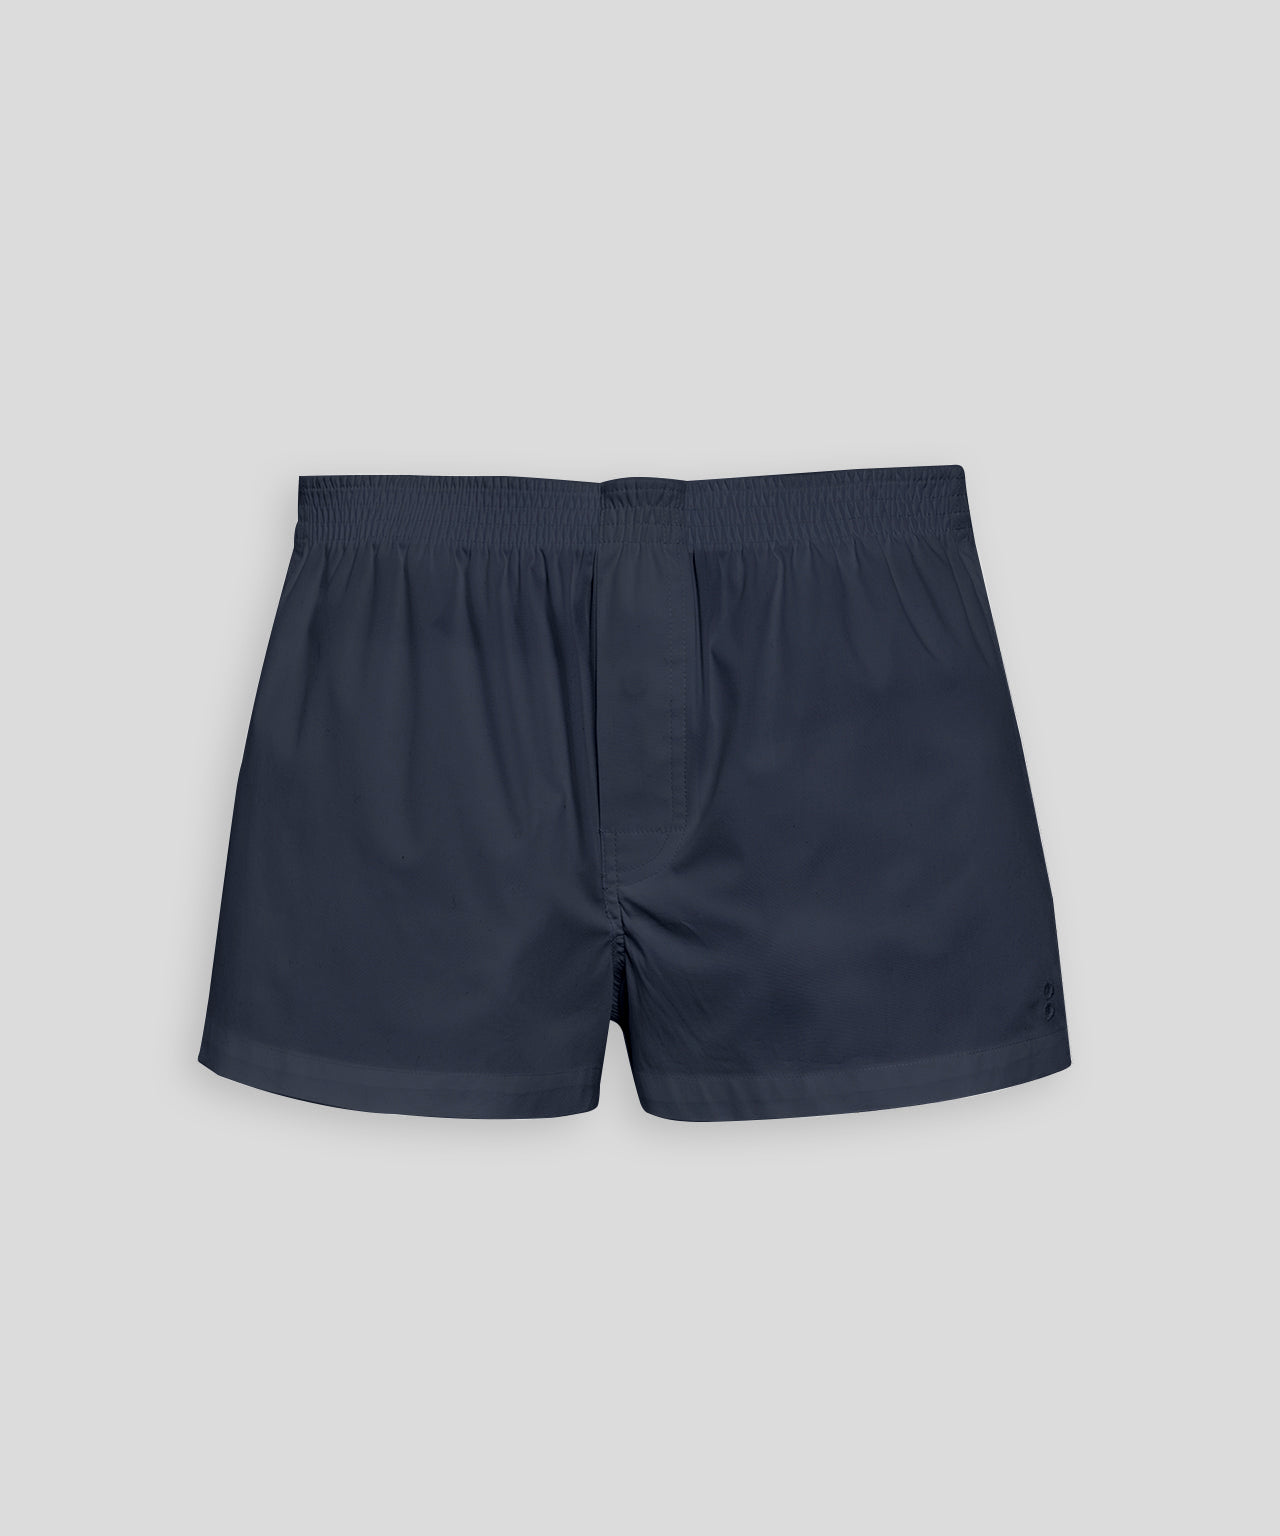 Navy Cotton Printed Boxer Shorts By Grunt, GRT-VKB-01